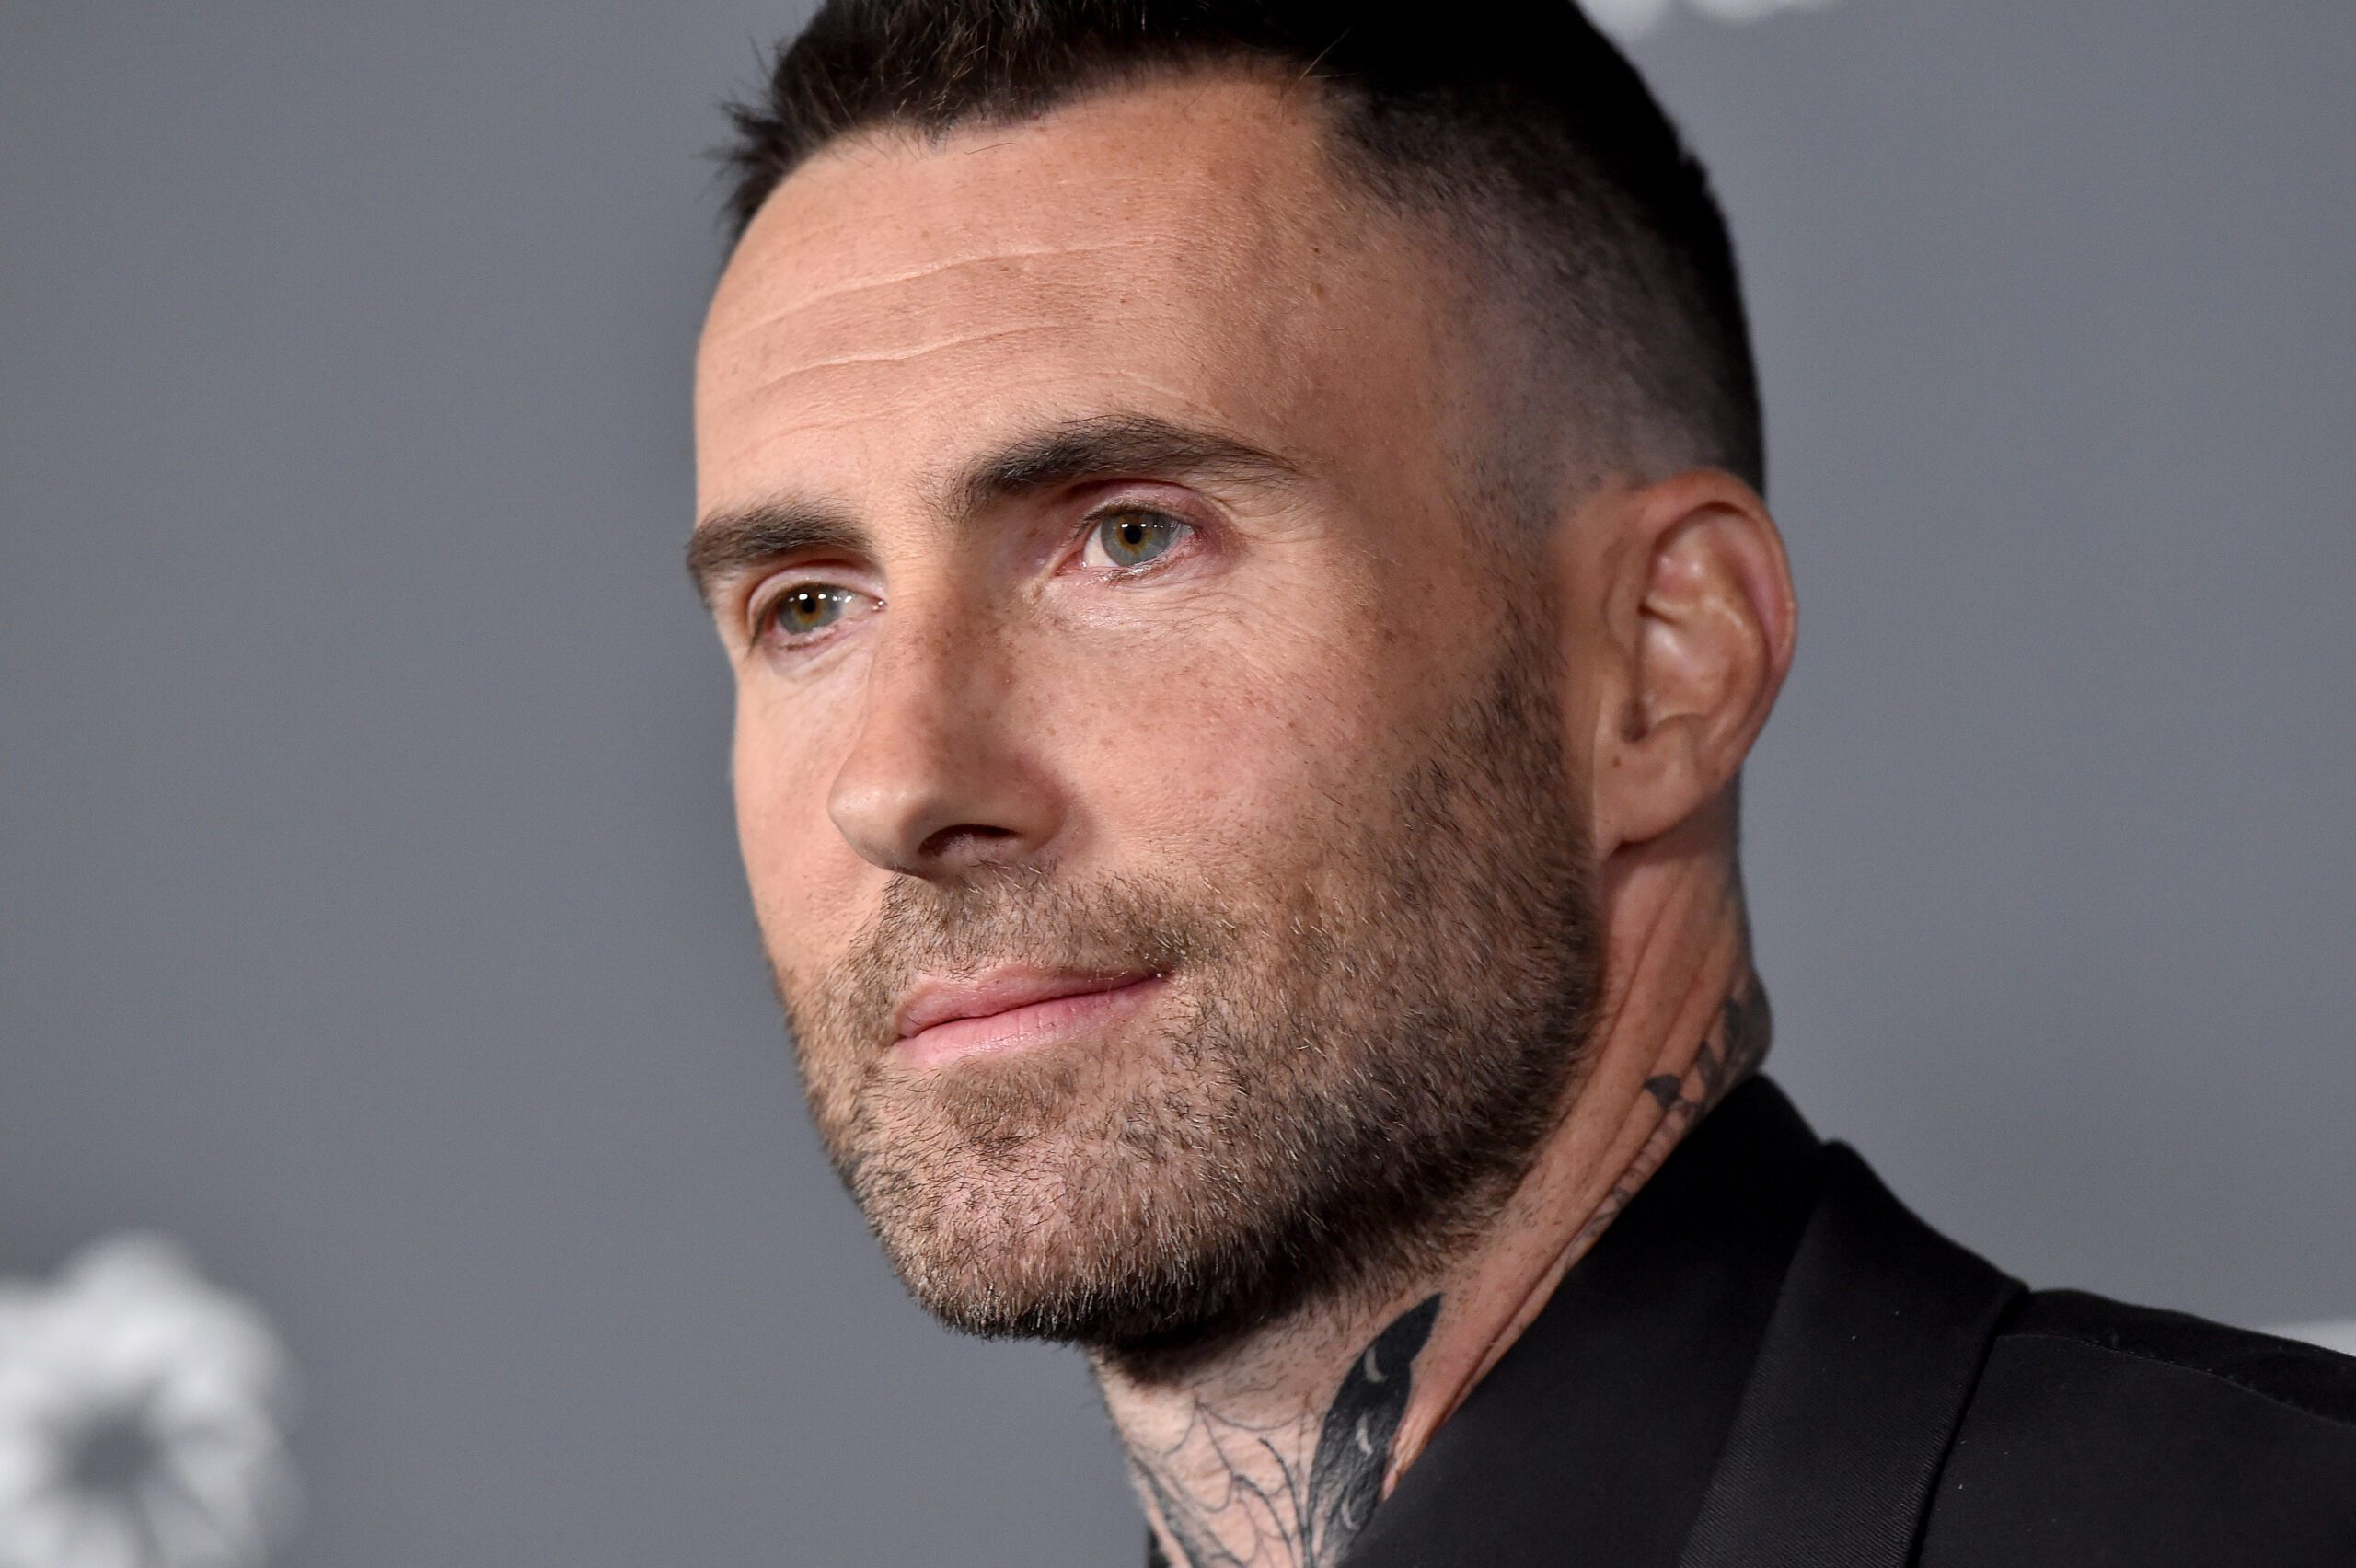 adam-levine-sliding-into-dms-reflects-his-past-stance-on-promiscuity-and-the-futility-of-monogamy